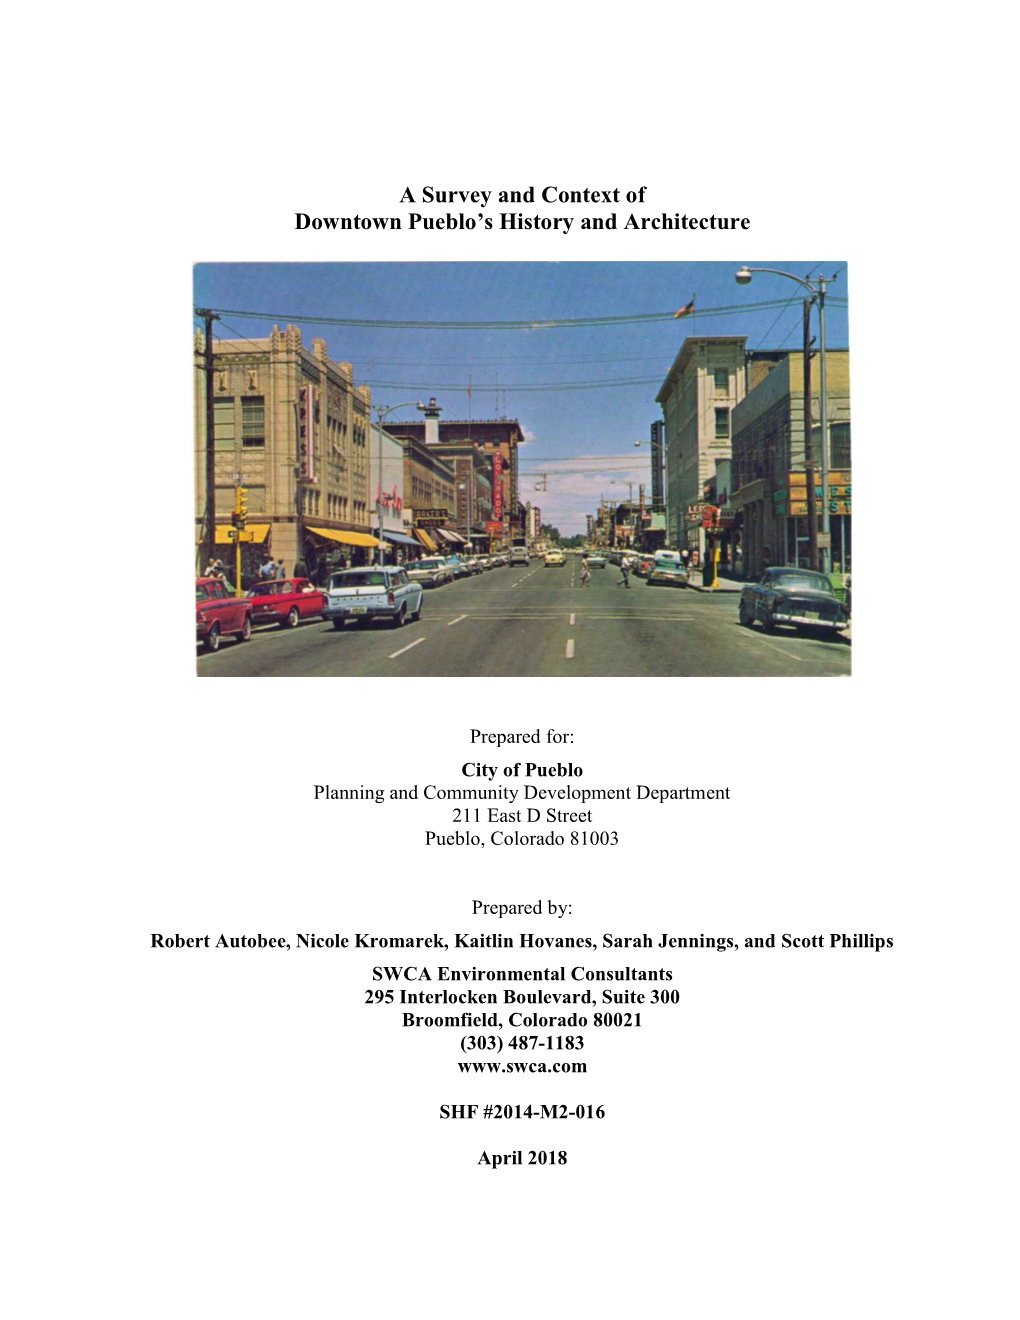 A Survey and Context of Downtown Pueblo's History and Architecture